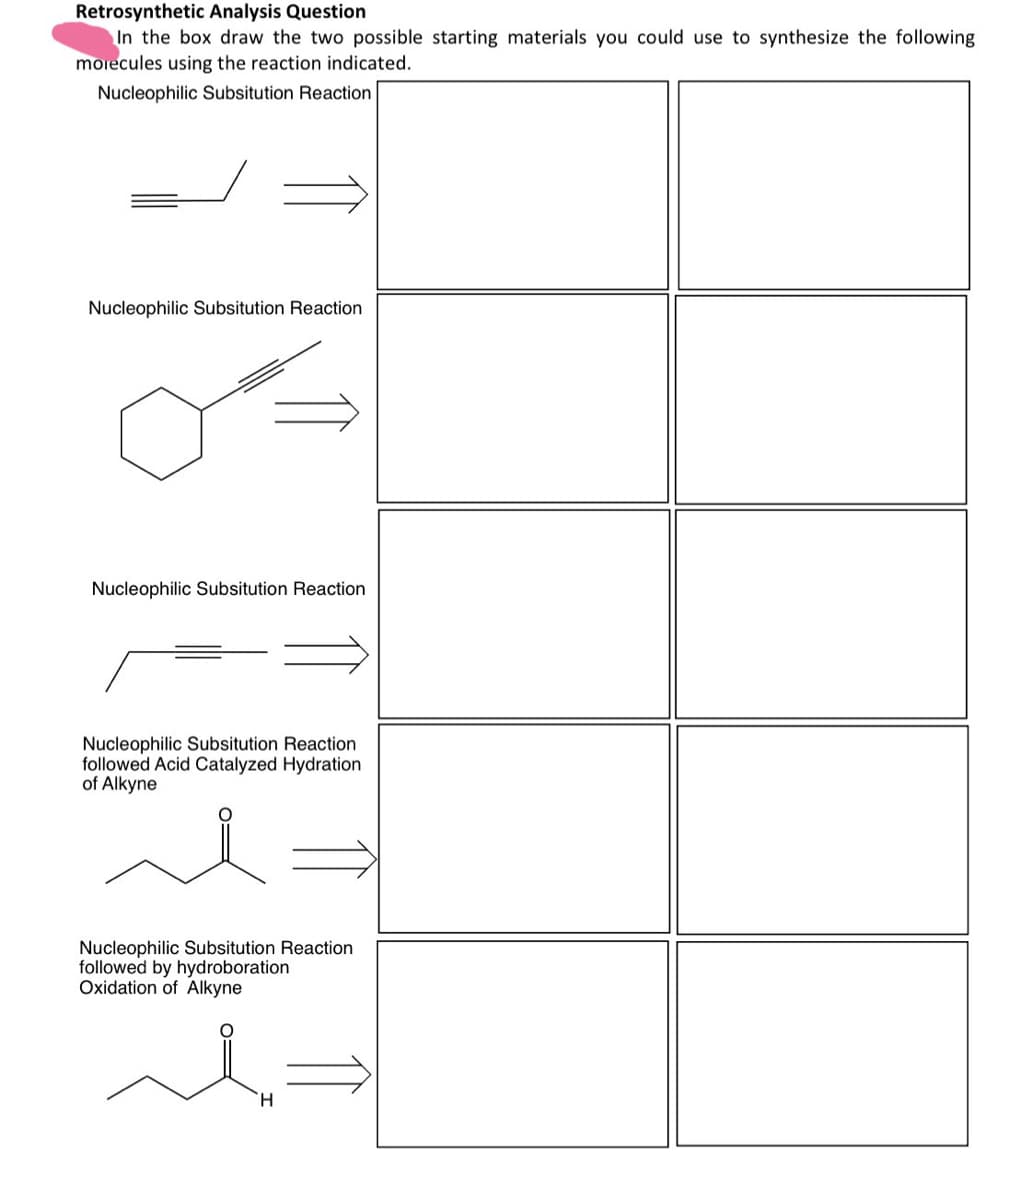 Retrosynthetic Analysis Question
In the box draw the two possible starting materials you could use to synthesize the following
molecules using the reaction indicated.
Nucleophilic Subsitution Reaction
Nucleophilic Subsitution Reaction
Nucleophilic Subsitution Reaction
Nucleophilic Subsitution Reaction
followed Acid Catalyzed Hydration
of Alkyne
Nucleophilic Subsitution Reaction
followed by hydroboration
Oxidation of Alkyne
H